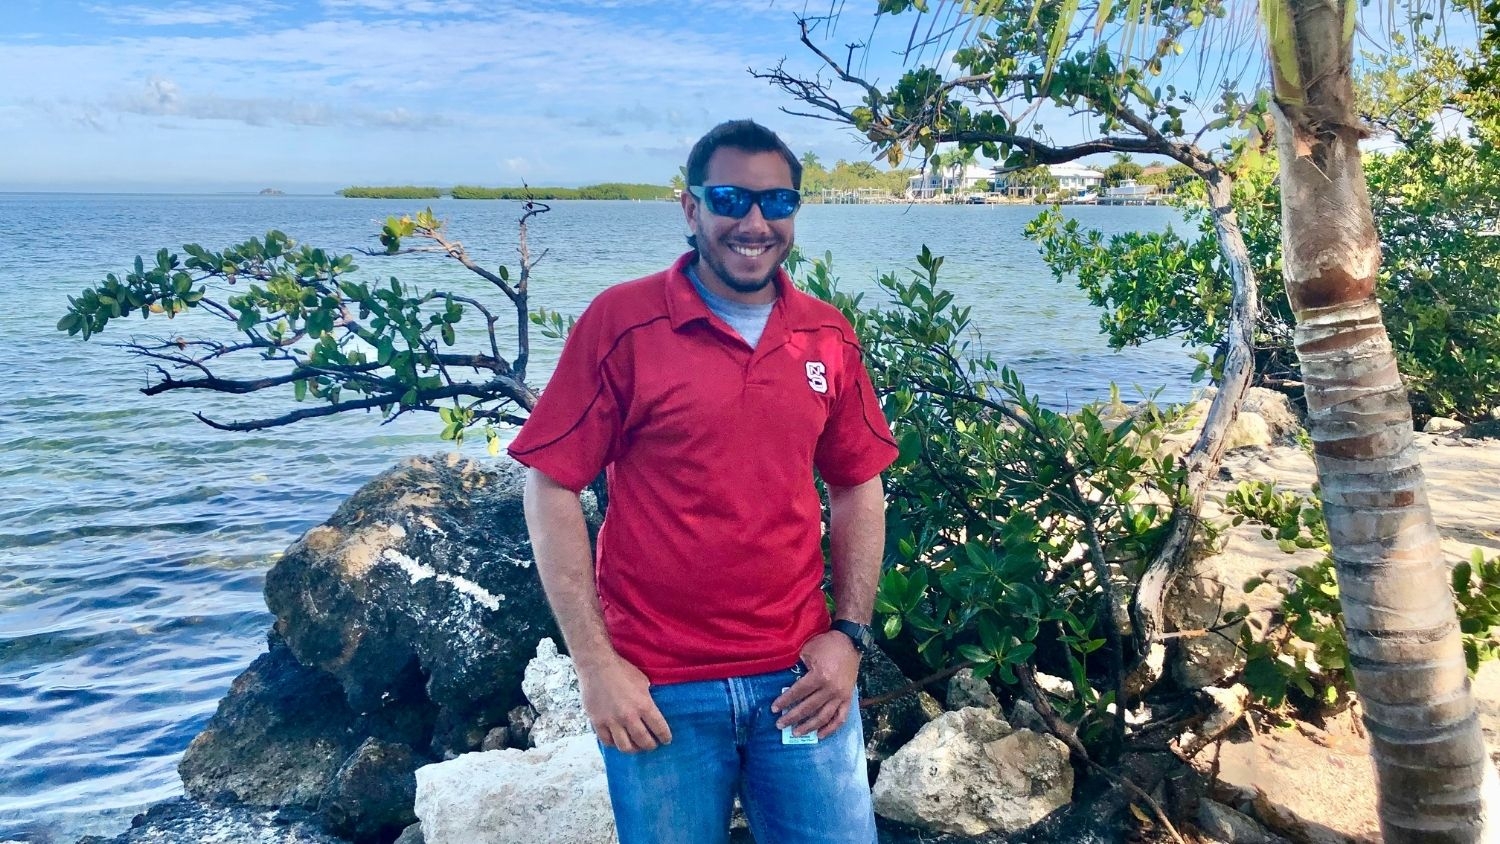 Daniel Parobok in NC State shirt in front of ocean and tropical tree - Five Questions with Environmental Planner and Biologist Daniel Parobok - Forestry and Environmental Resources NC State University